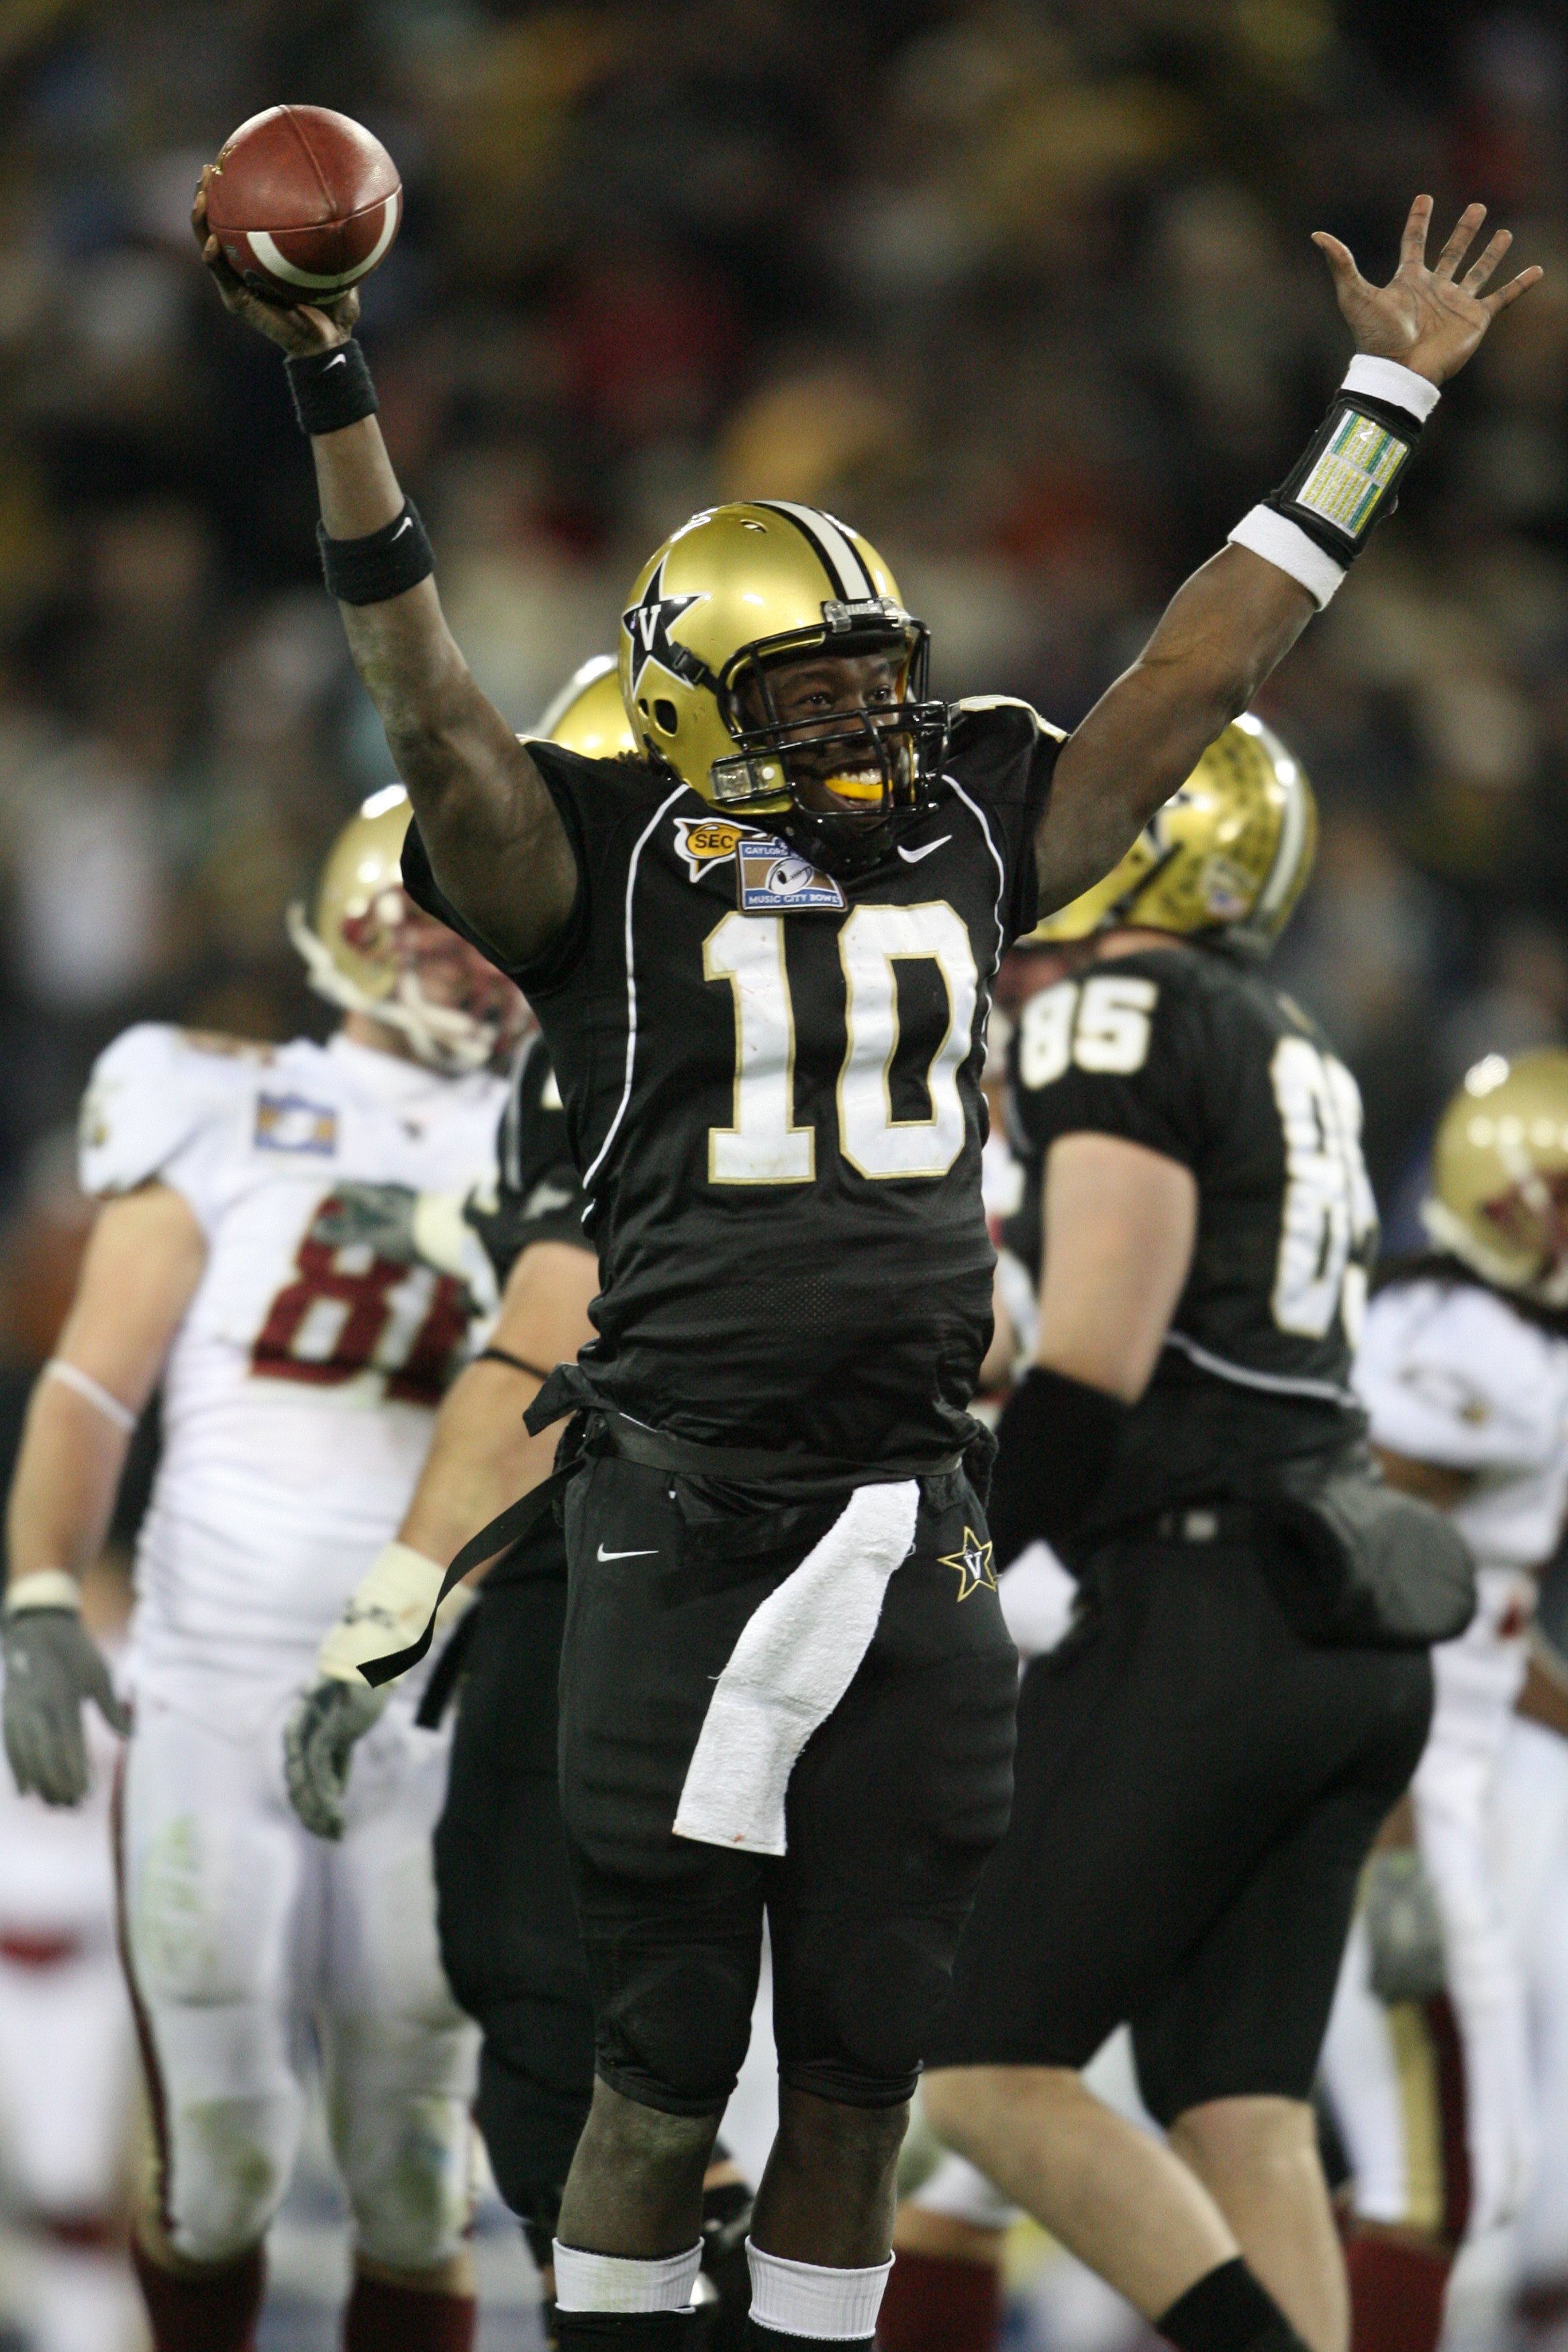 NASHVILLE, TN - DECEMBER 31:  Larry Smith #10 of the Vanderbilt Commodores celebrates against the Boston College Eagles during the Gaylord Hotels Music City Bowl at LP Field on December 31, 2008 in Nashville, Tennessee.  (Photo by Andy Lyons/Getty Images)